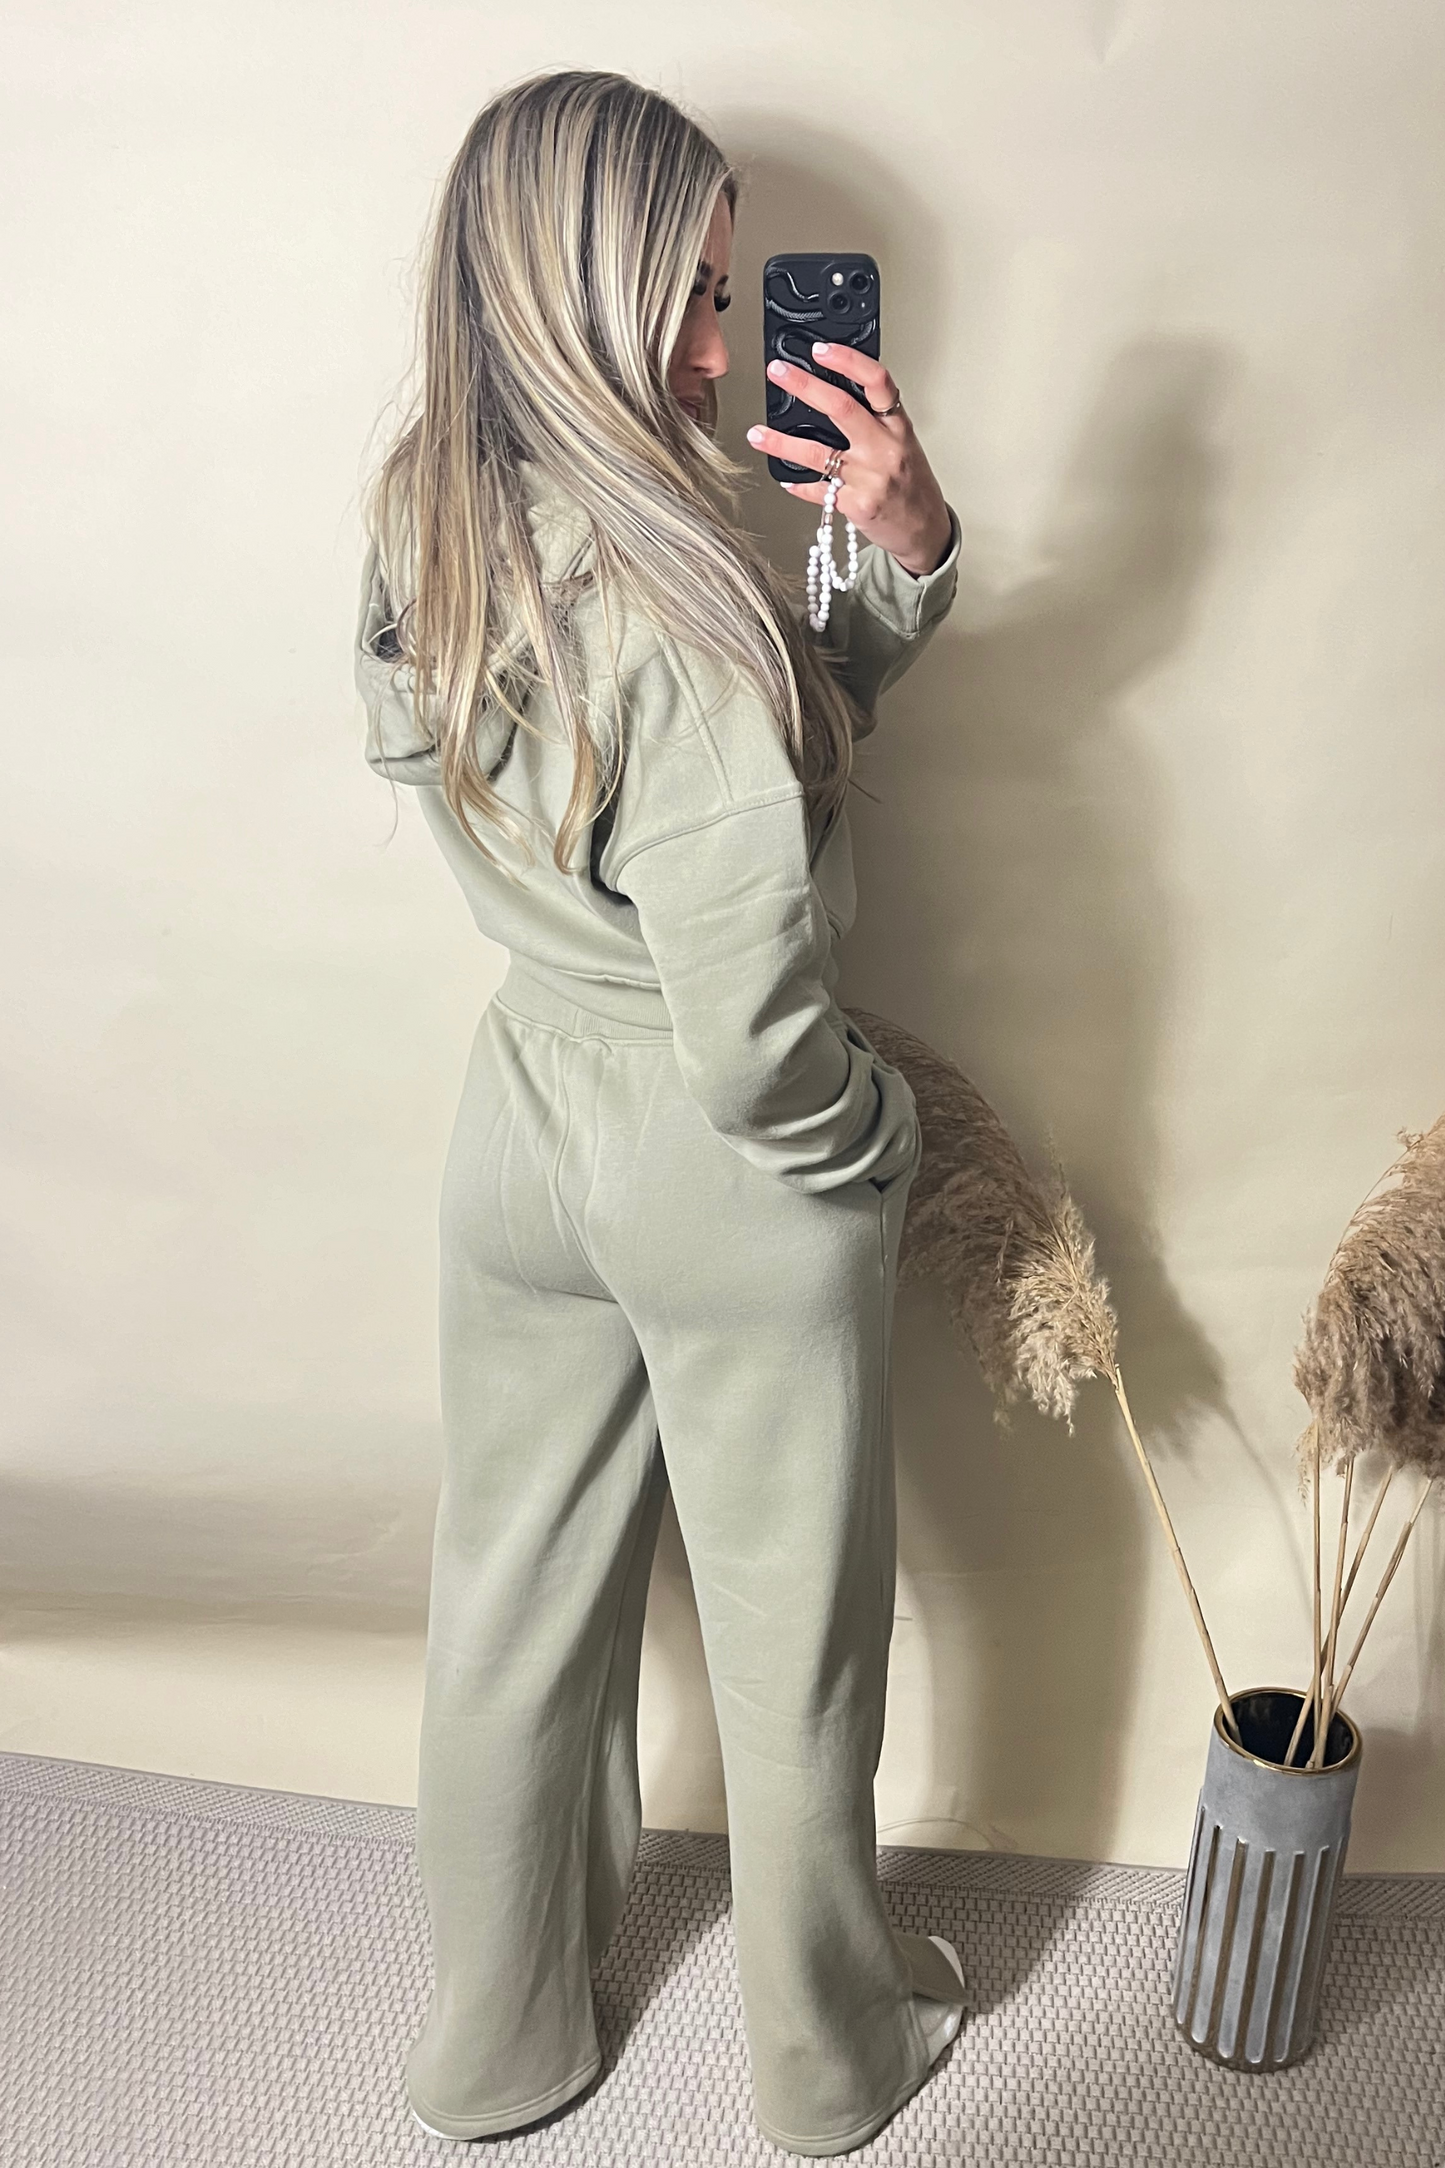 NYC Hooded Cropped Sweatshirt And Wide Leg Jogger Set (variants available)